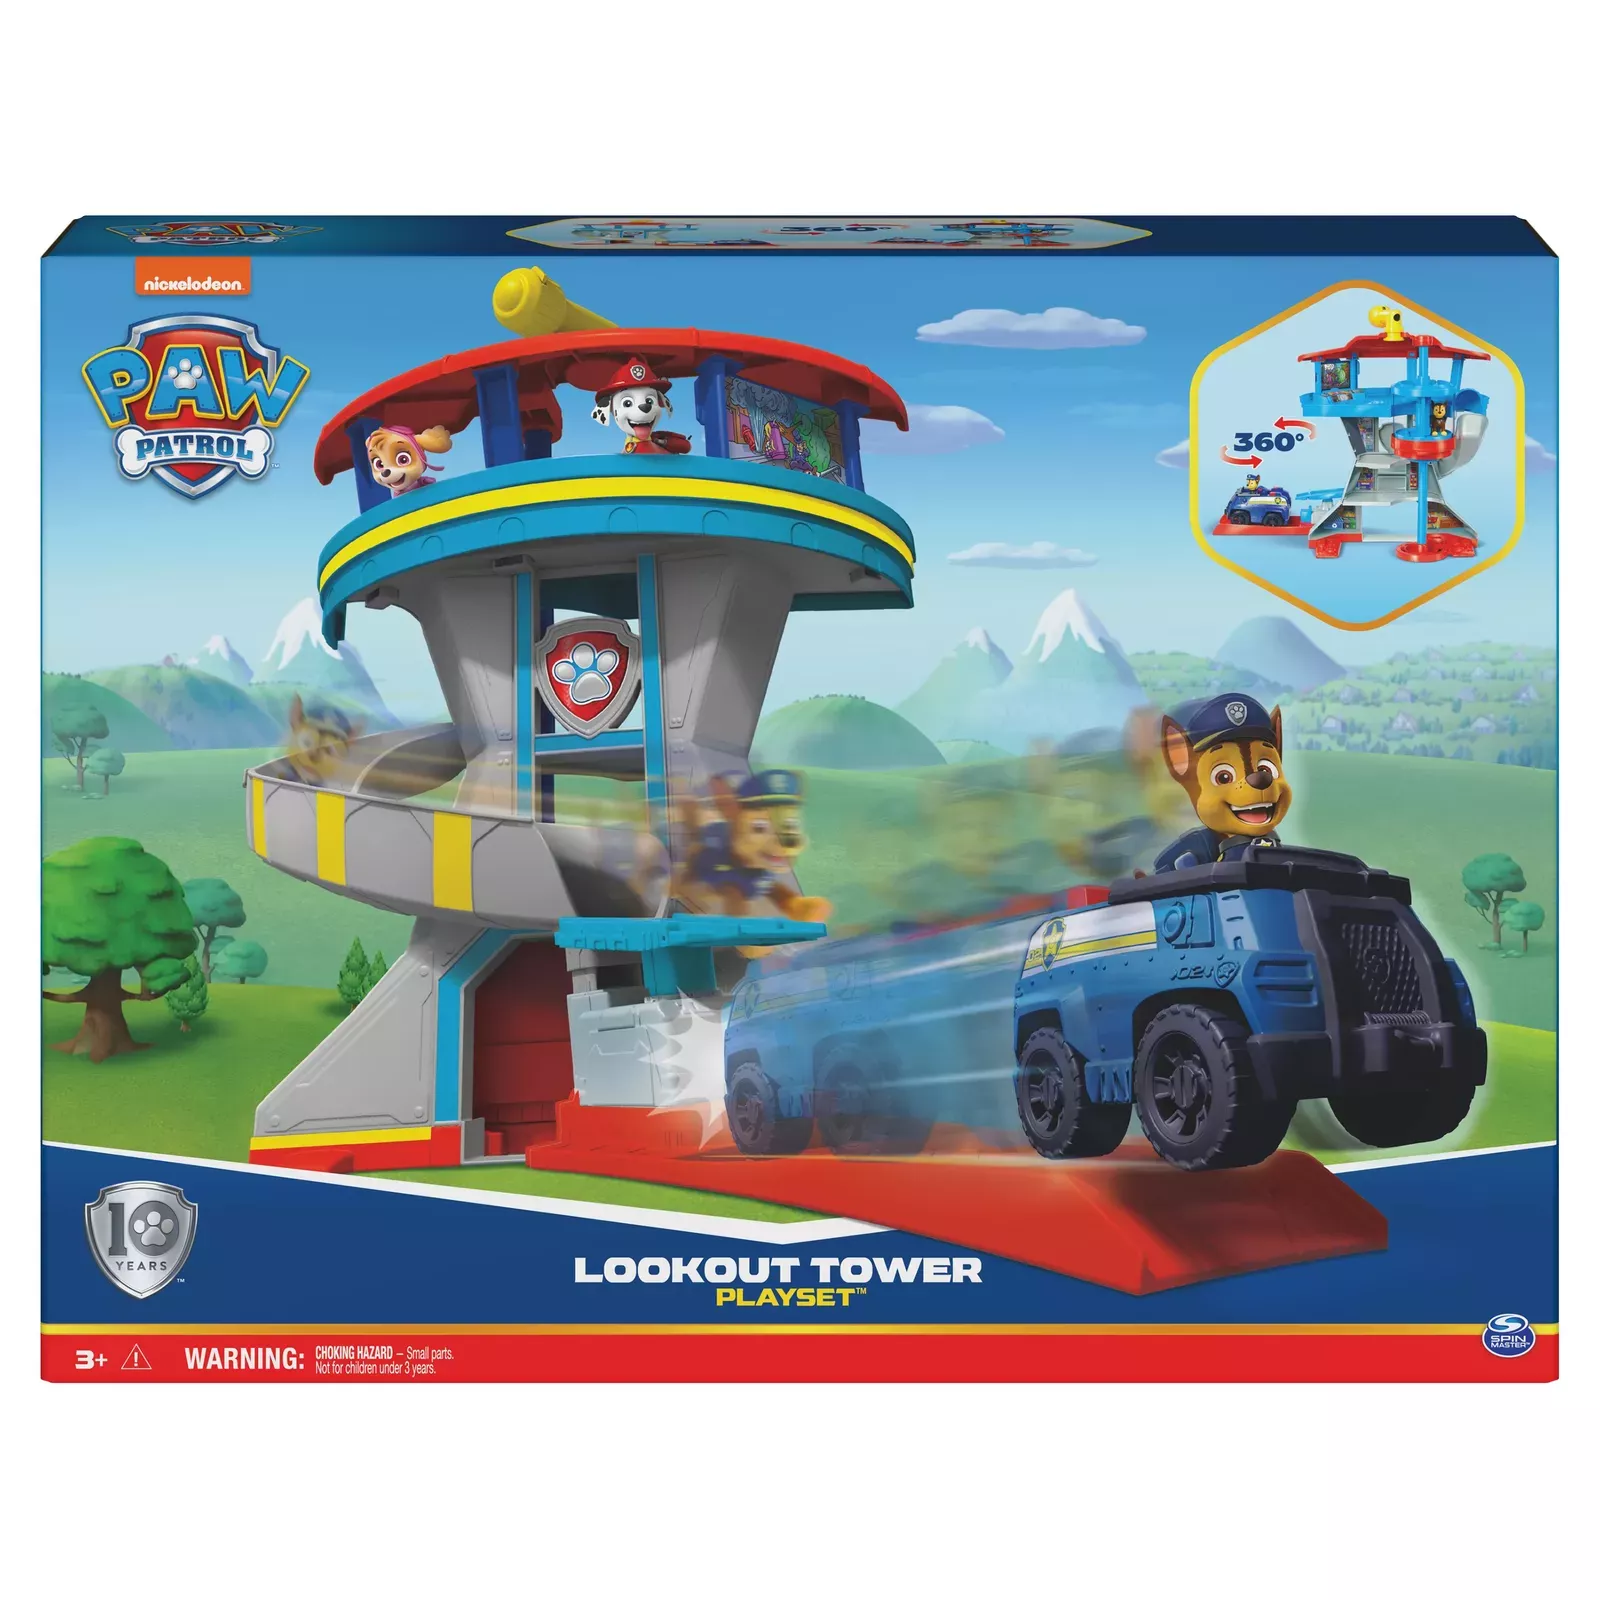 PAW Patrol Lookout Tower 6065500